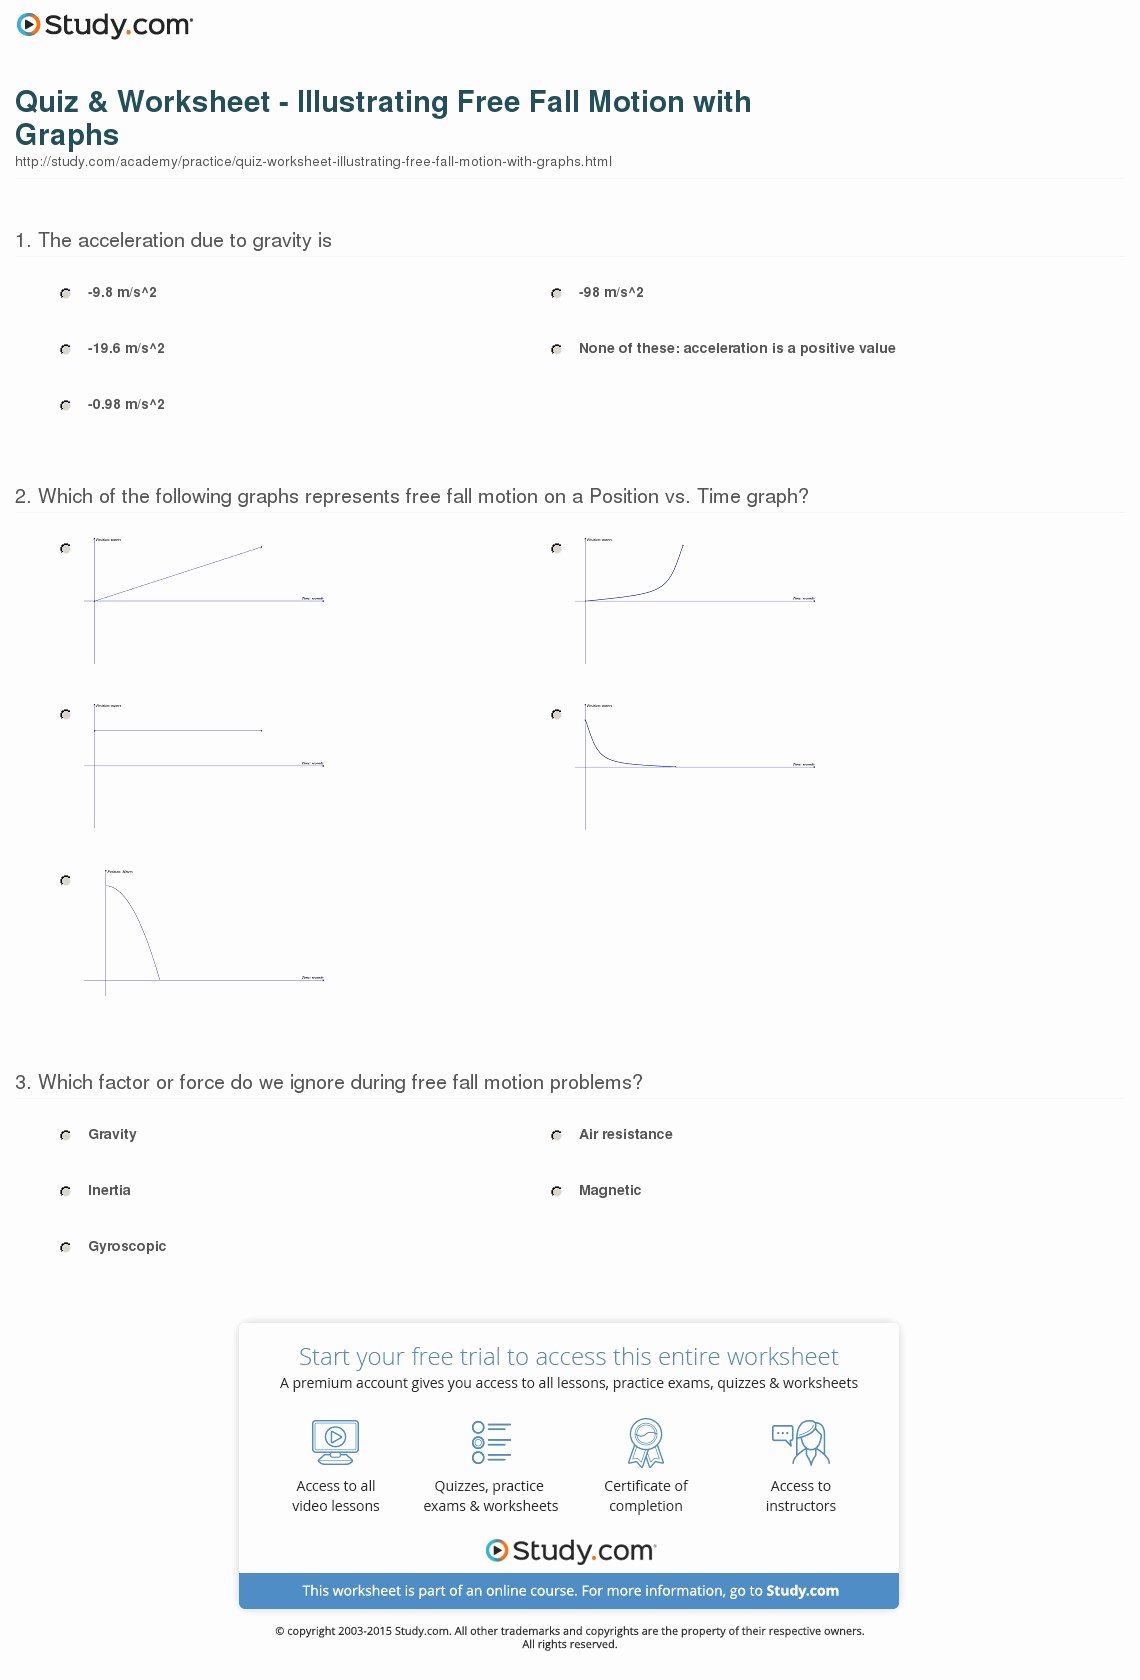 Free Fall Worksheet Answers Beautiful Quiz &amp; Worksheet Illustrating Free Fall Motion with